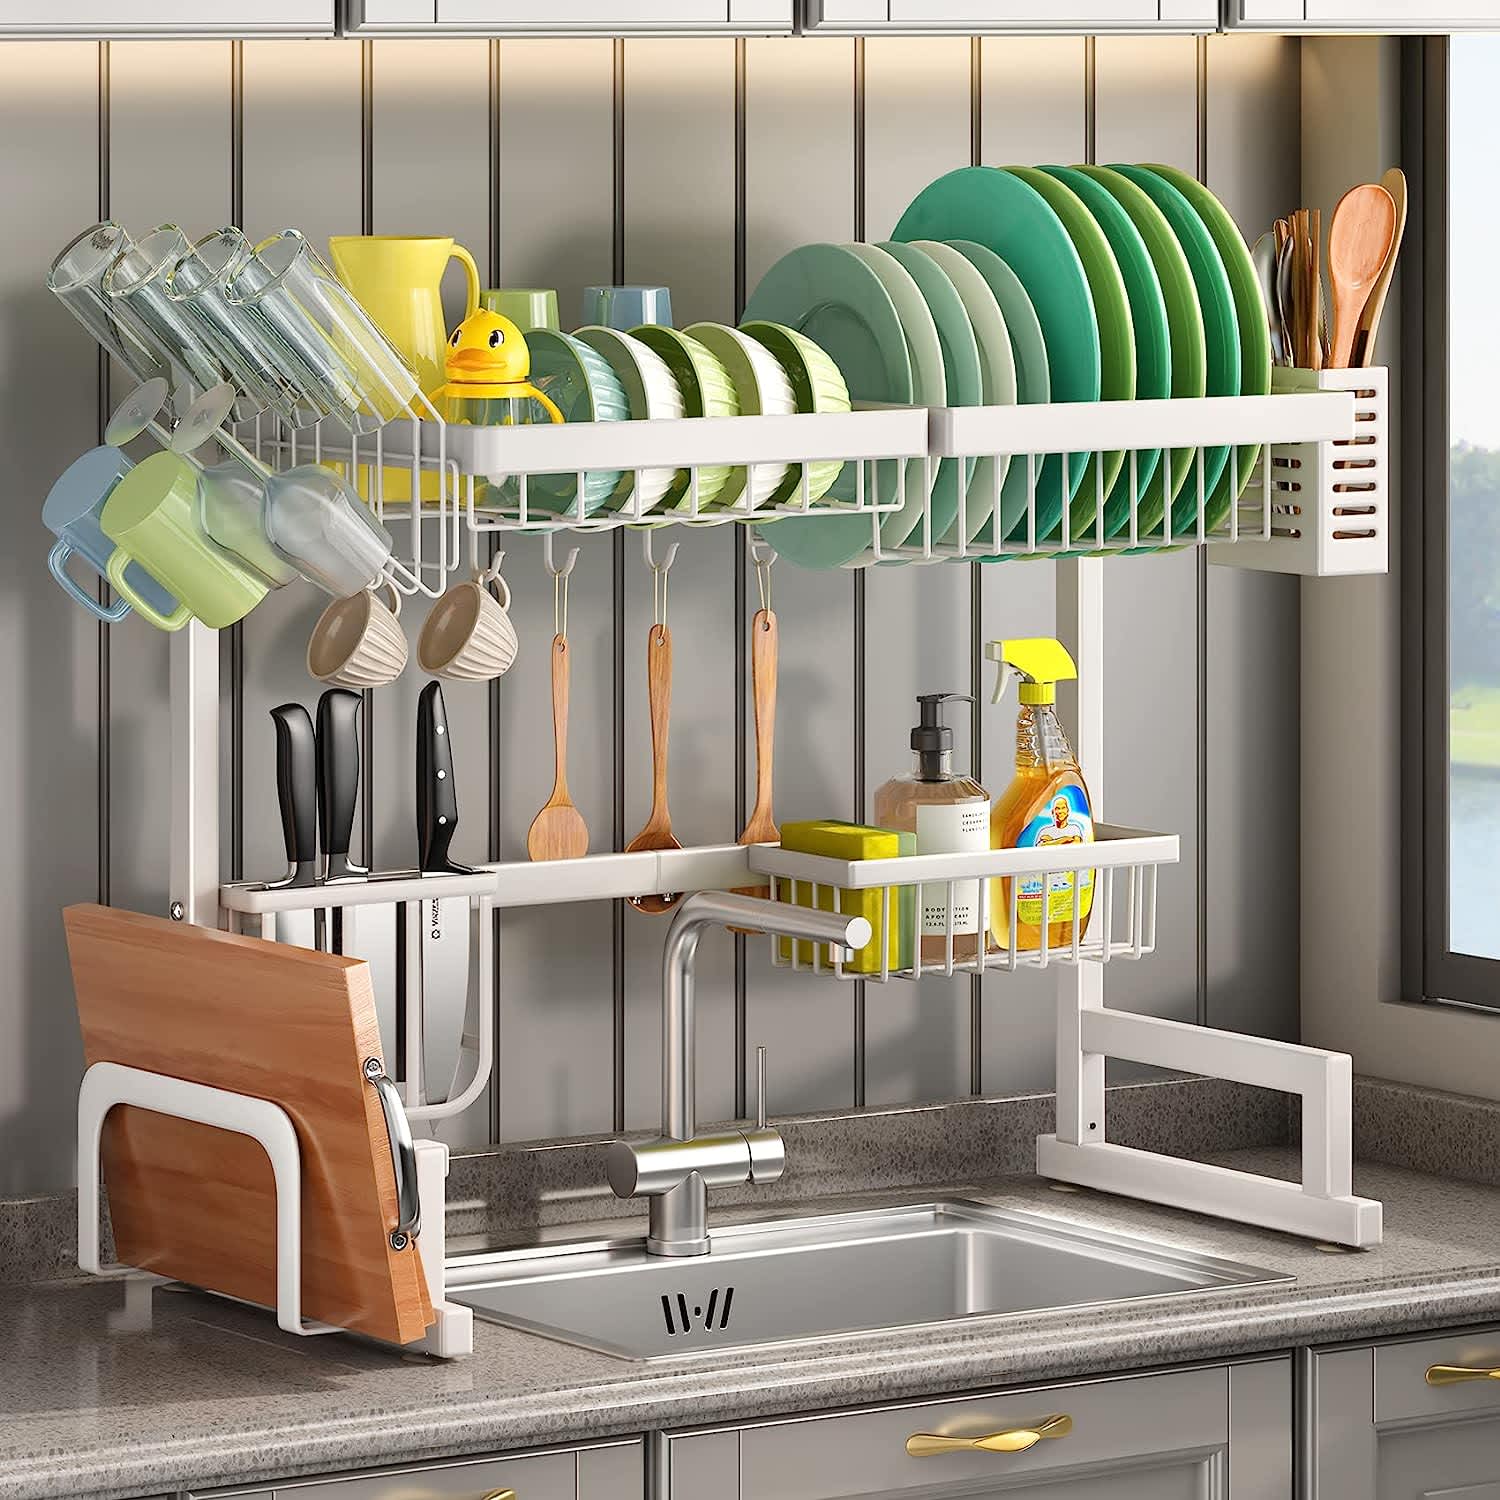 http://cdn.apartmenttherapy.info/image/upload/v1688407720/commerce/Over-the-Sink-Dish-Drying-Rack-amazon.jpg